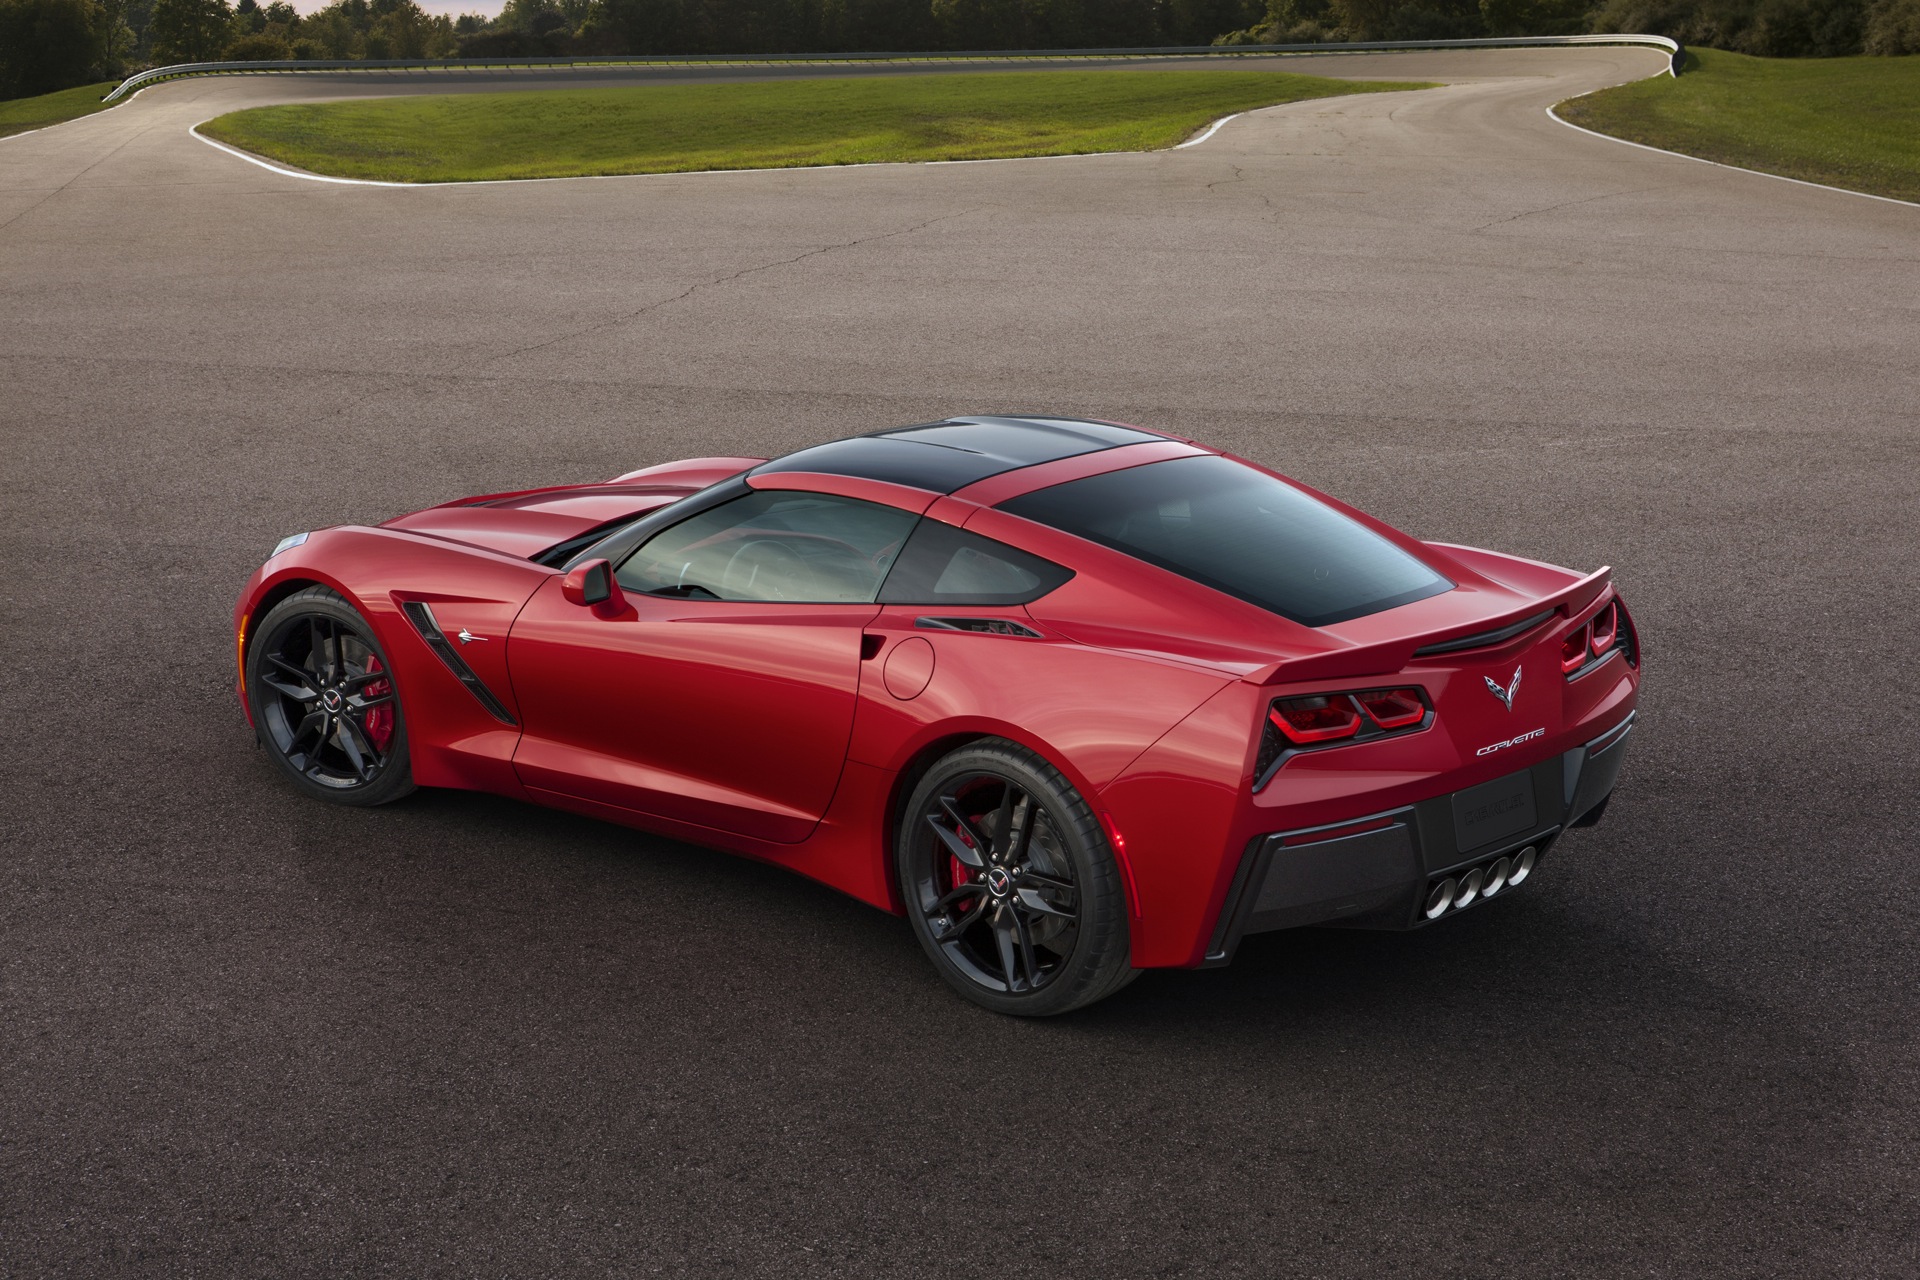 Corvette Meaning and Definition